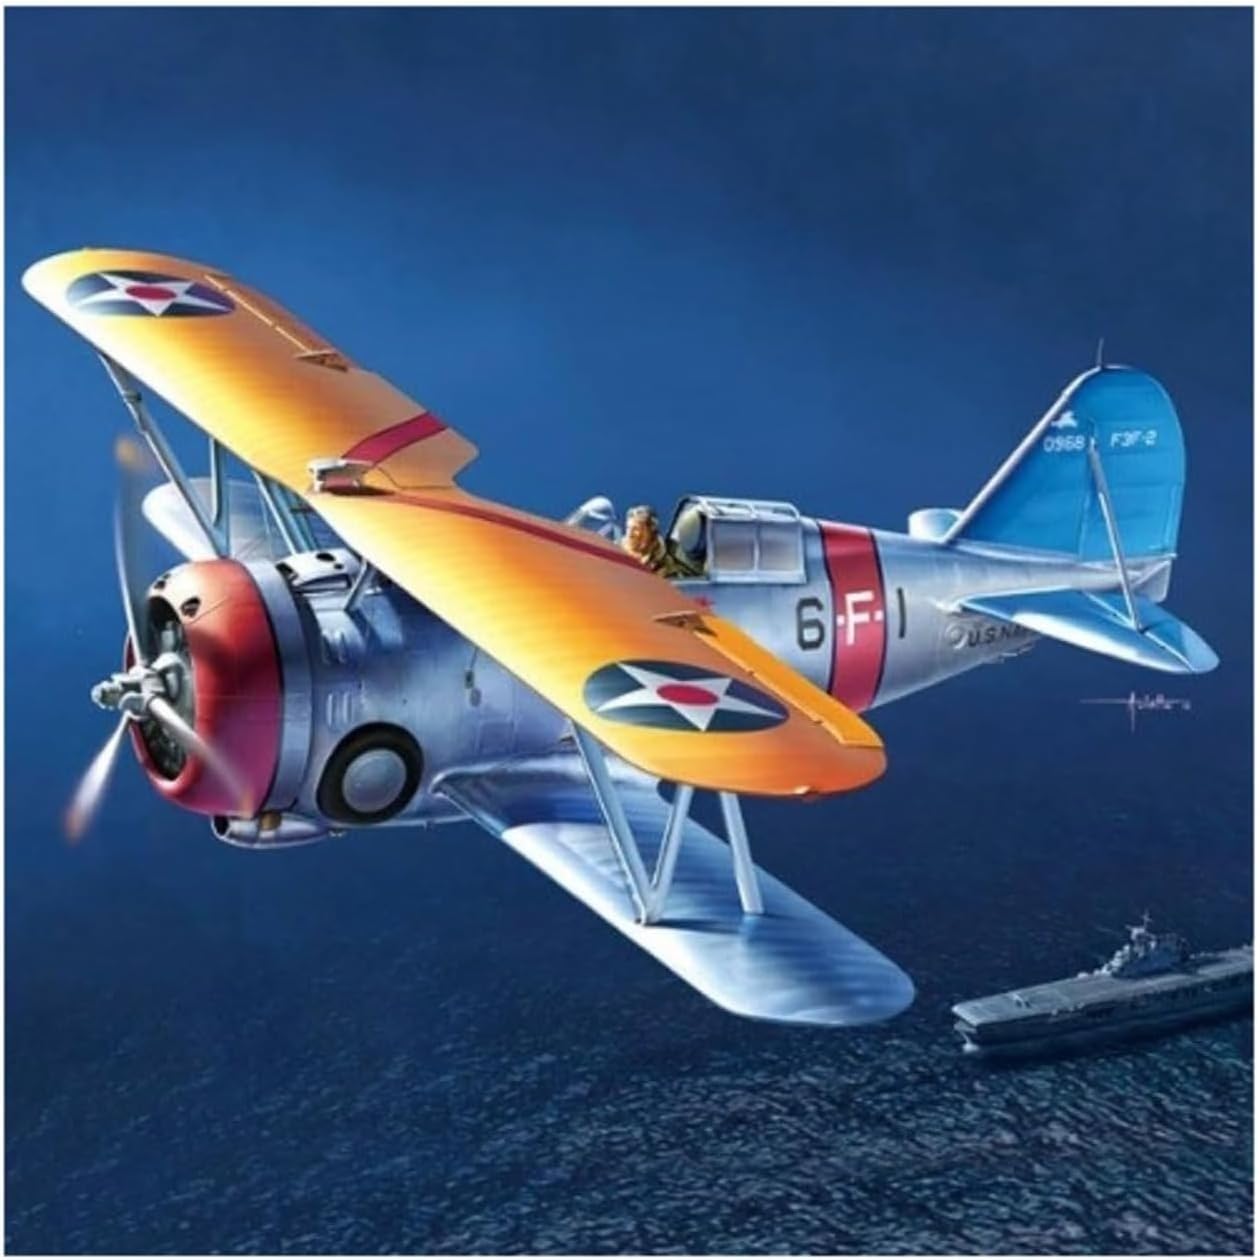 Academy 12326 1:48 US Navy Fighter F3F-2 VF-6 "Fighting Six" Aircraft Model Kit